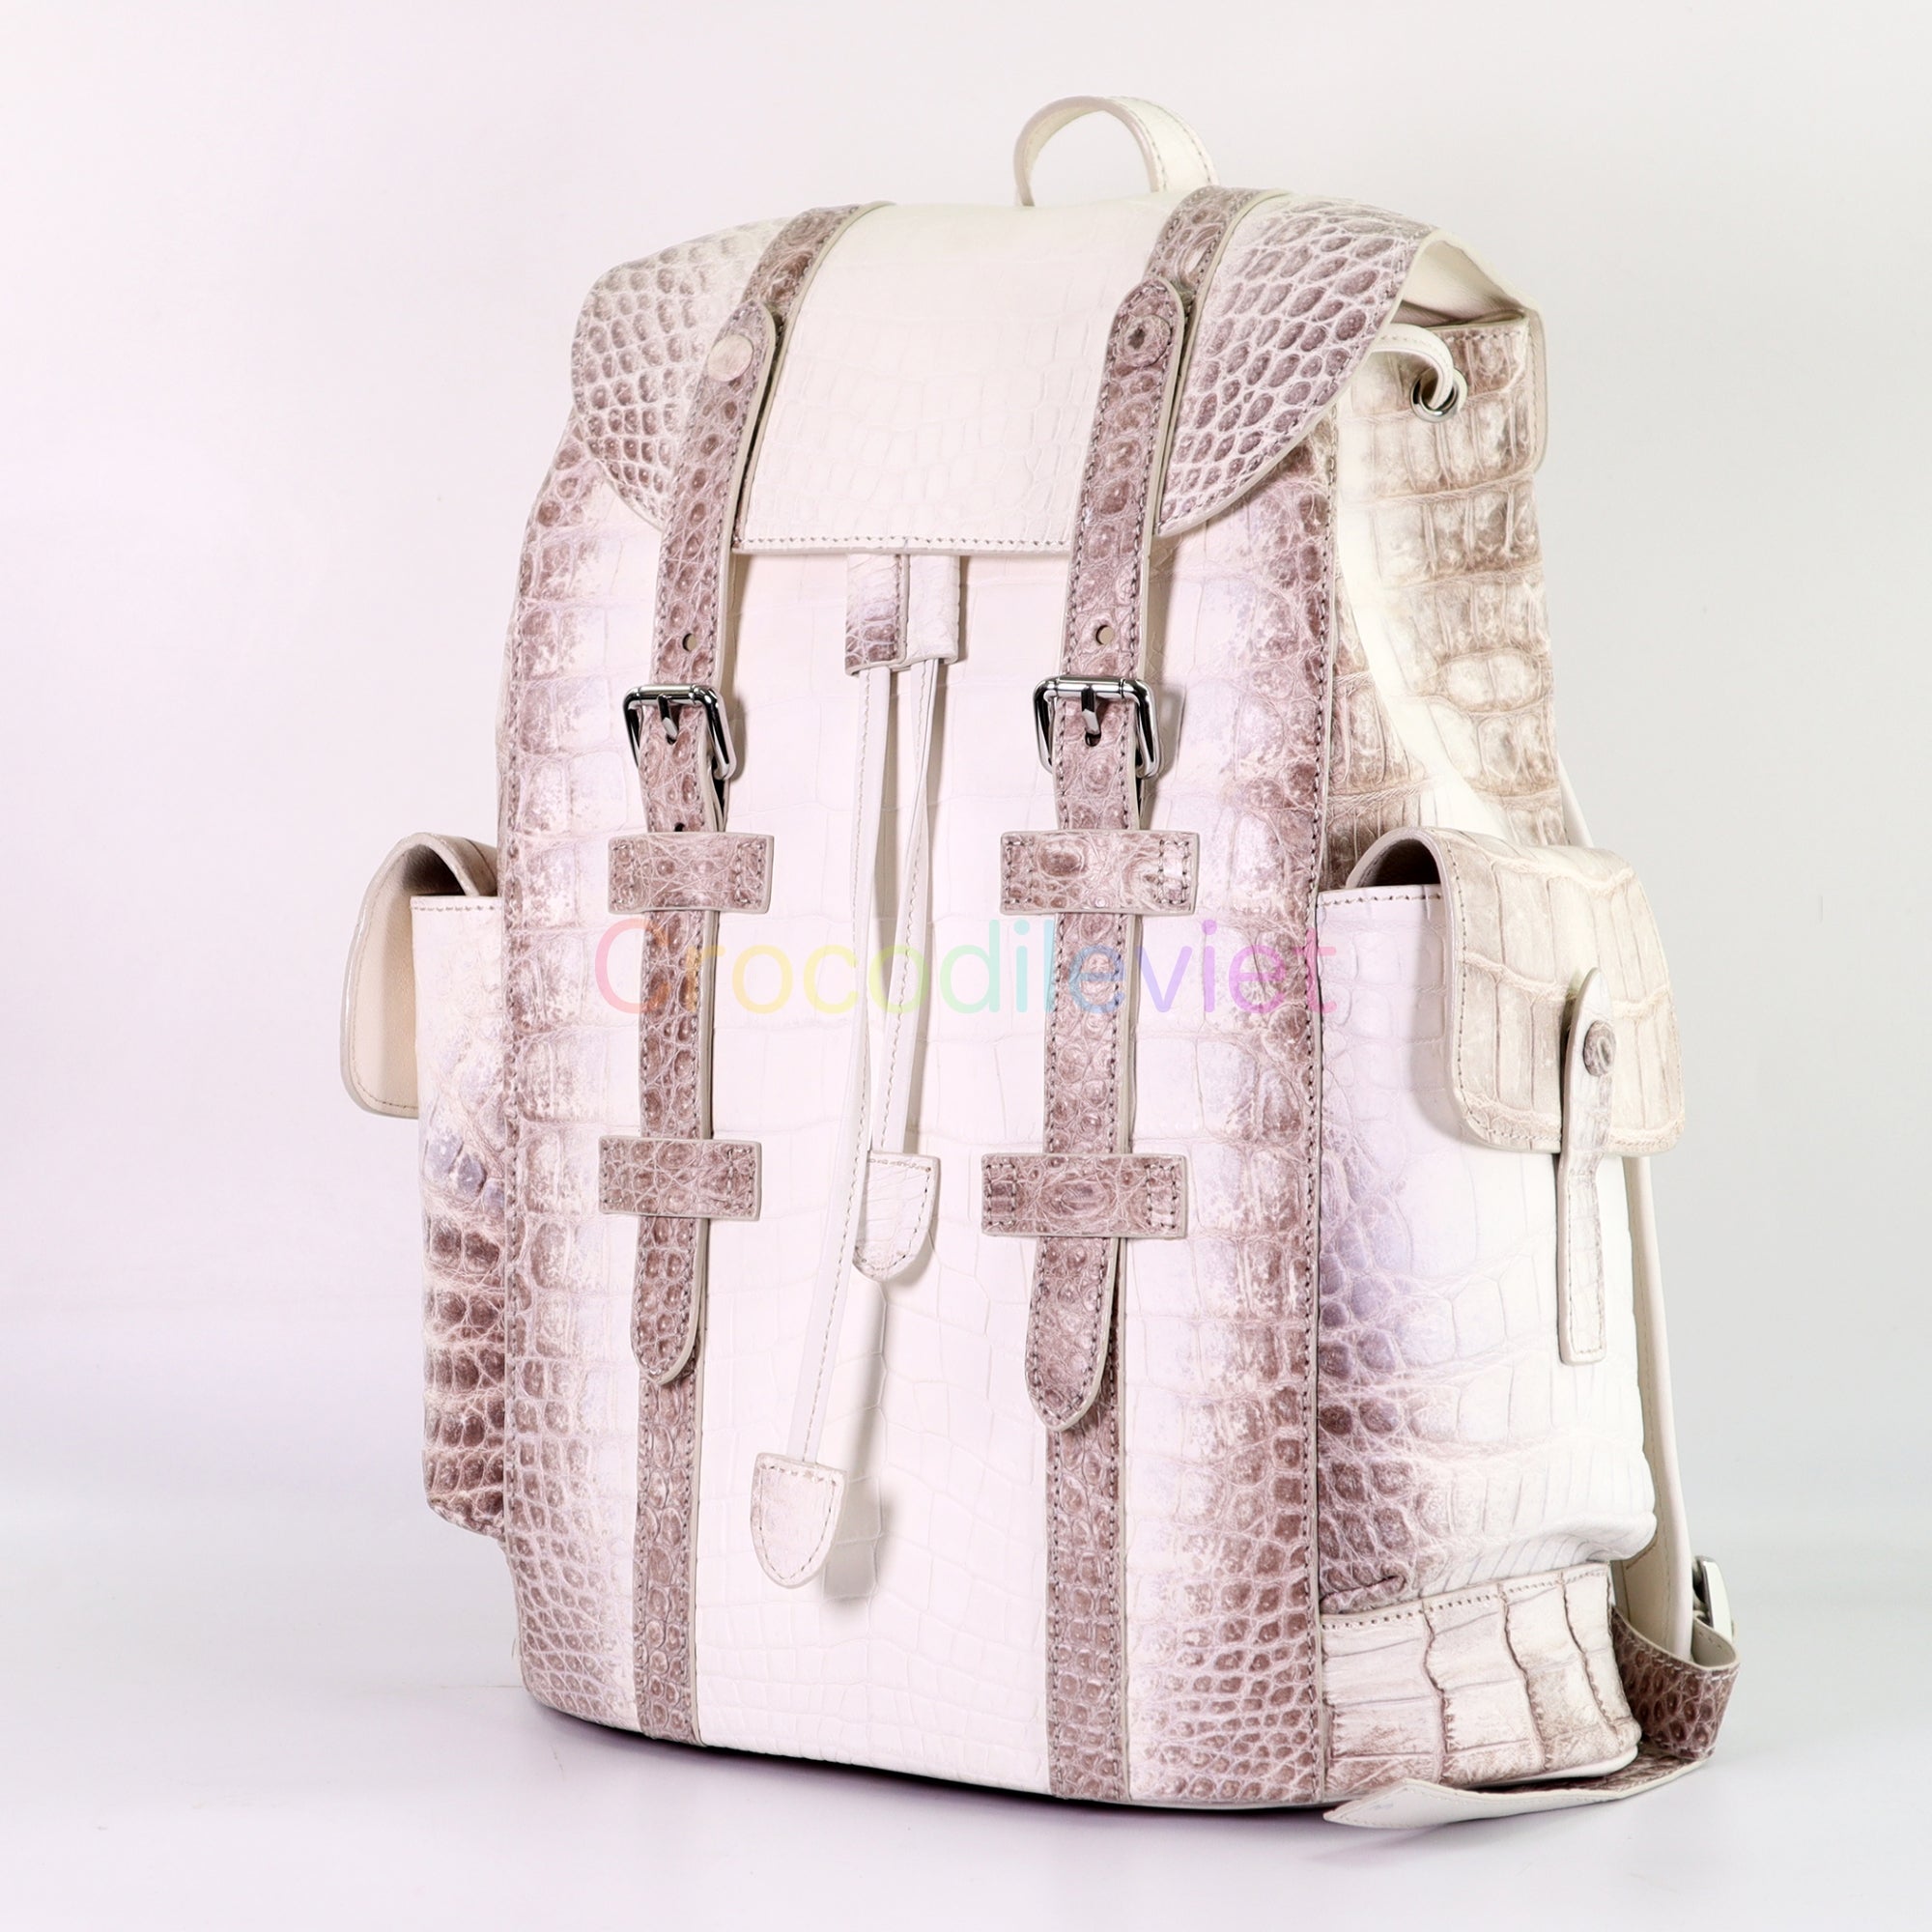 Christopher backpack leather bag Louis Vuitton White in Leather